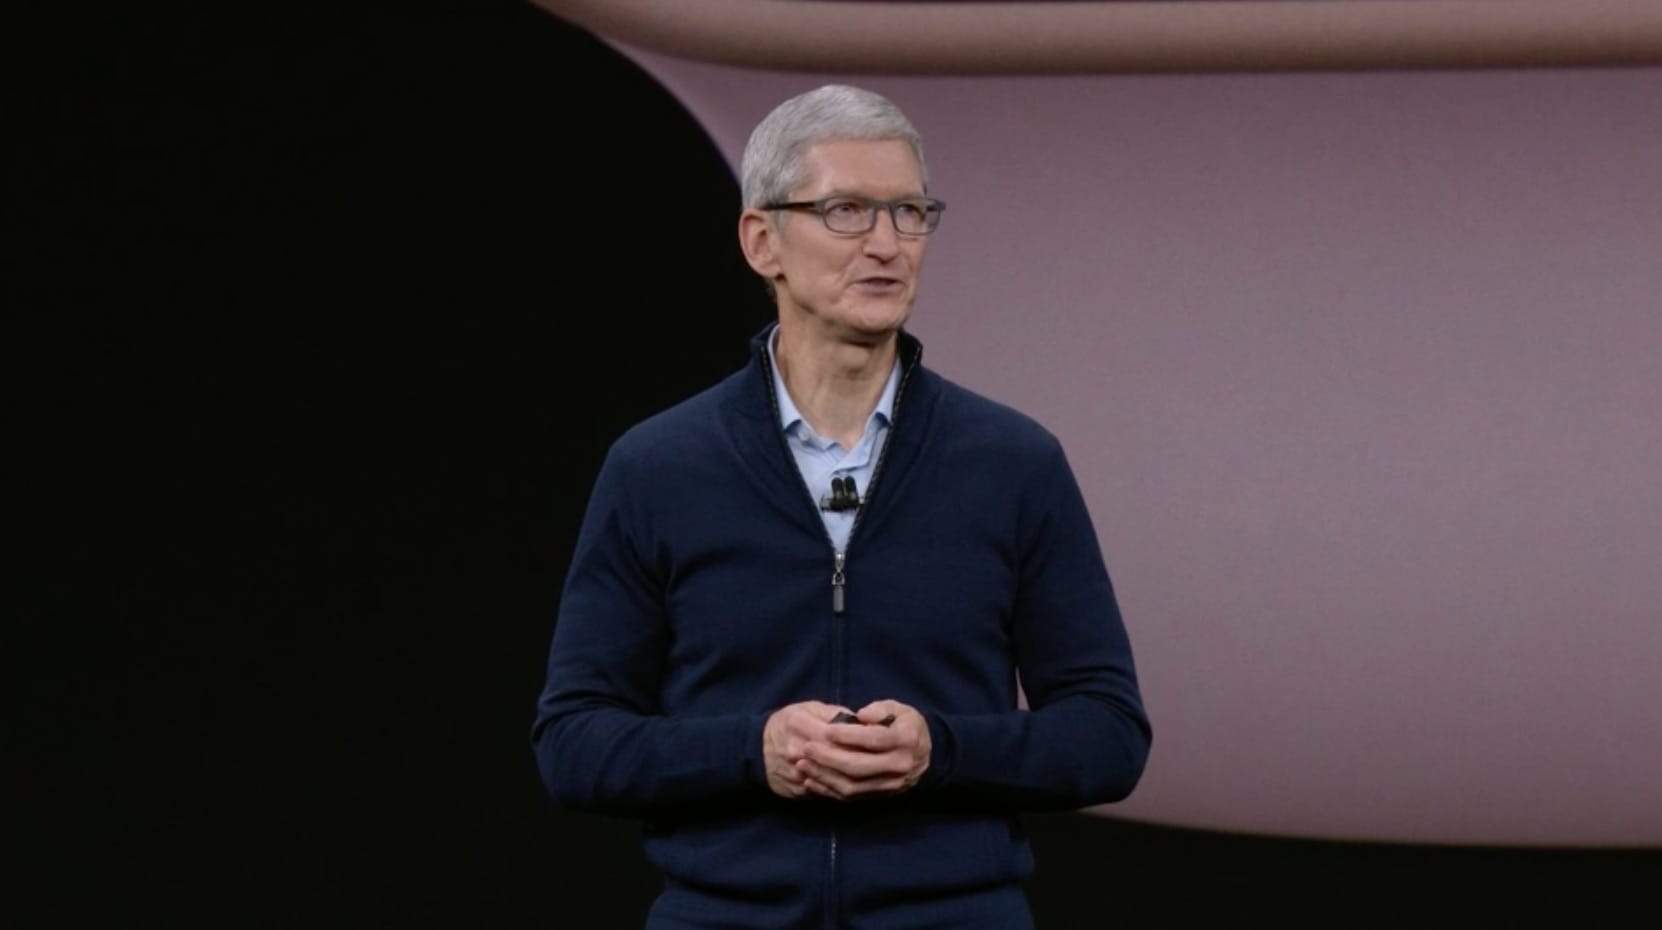 Tim Cook at Apple iPhone X event